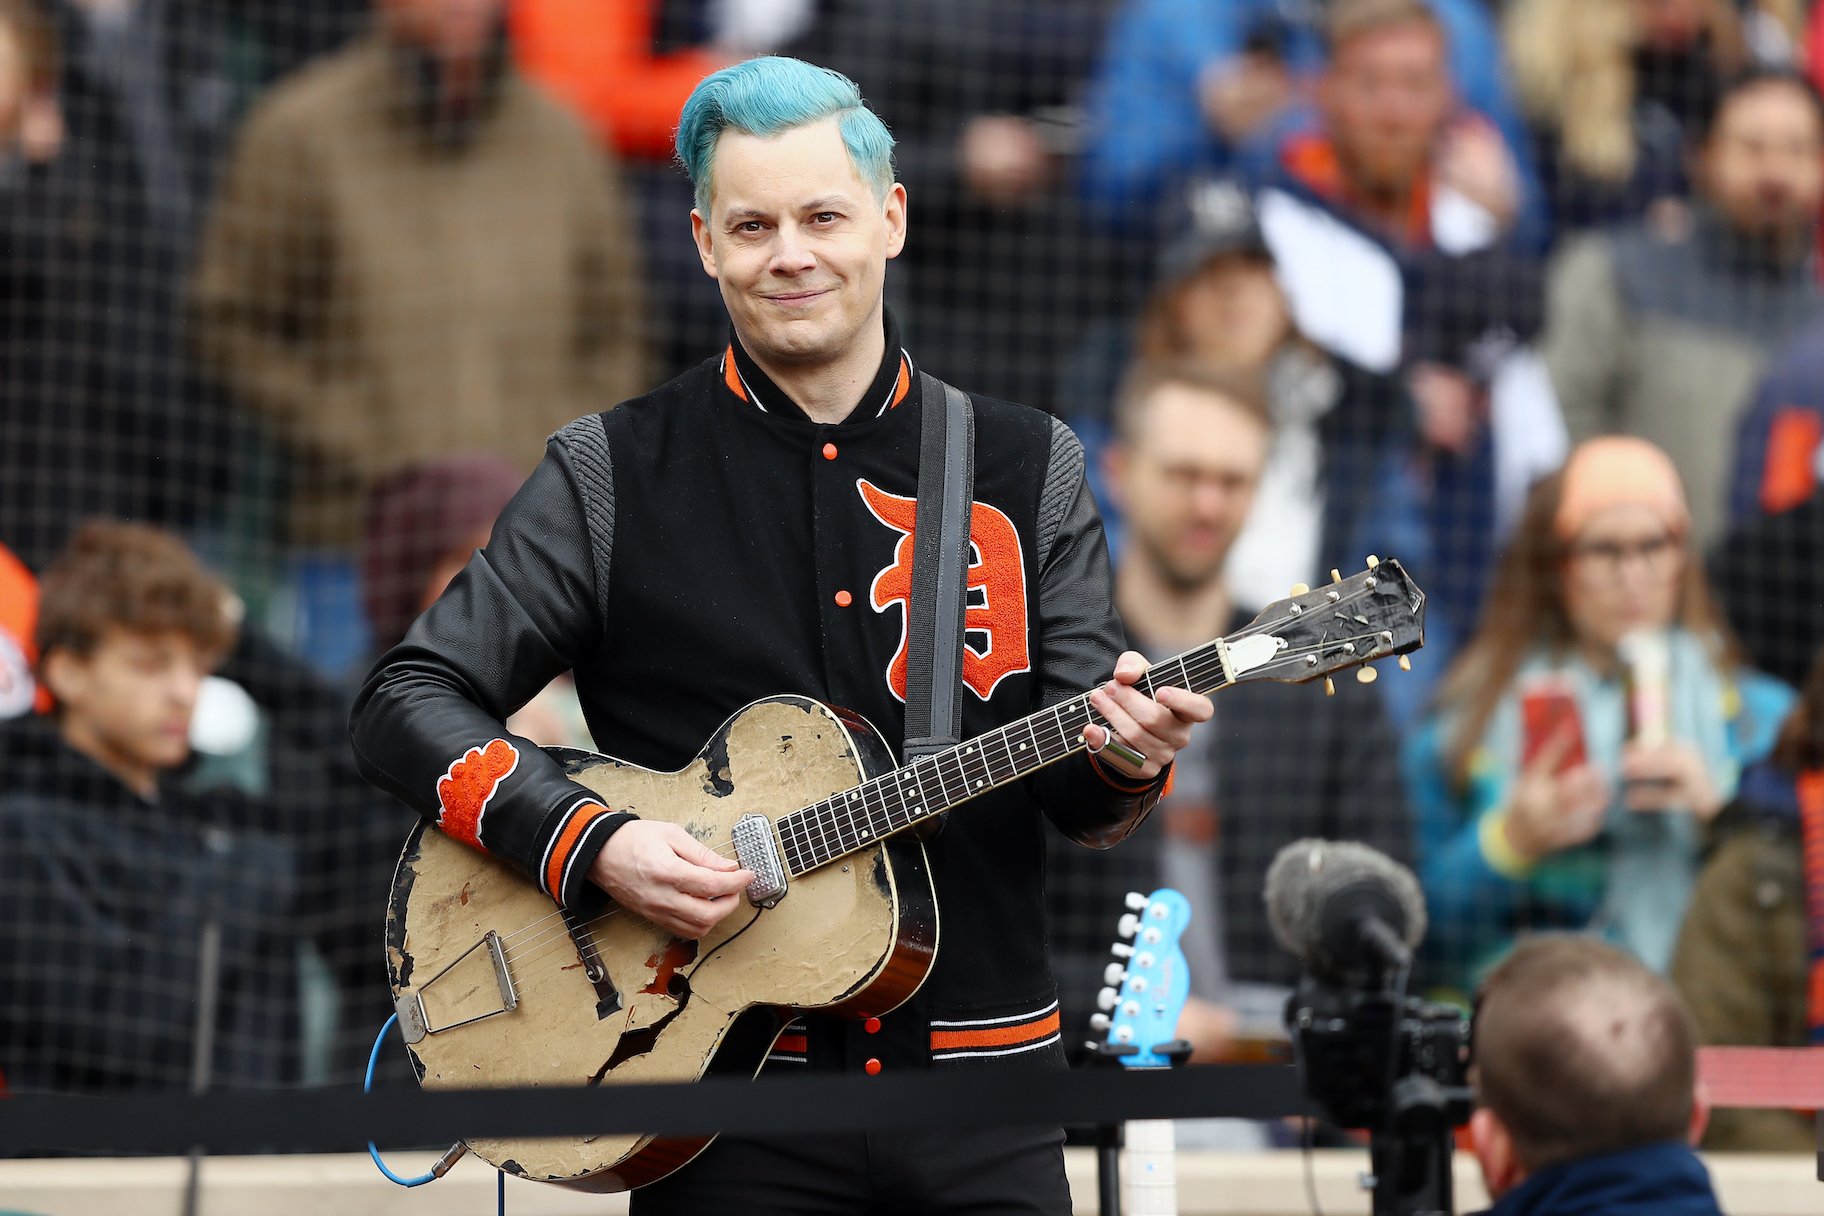 Jack White holding a guitar and smiling at a sports game